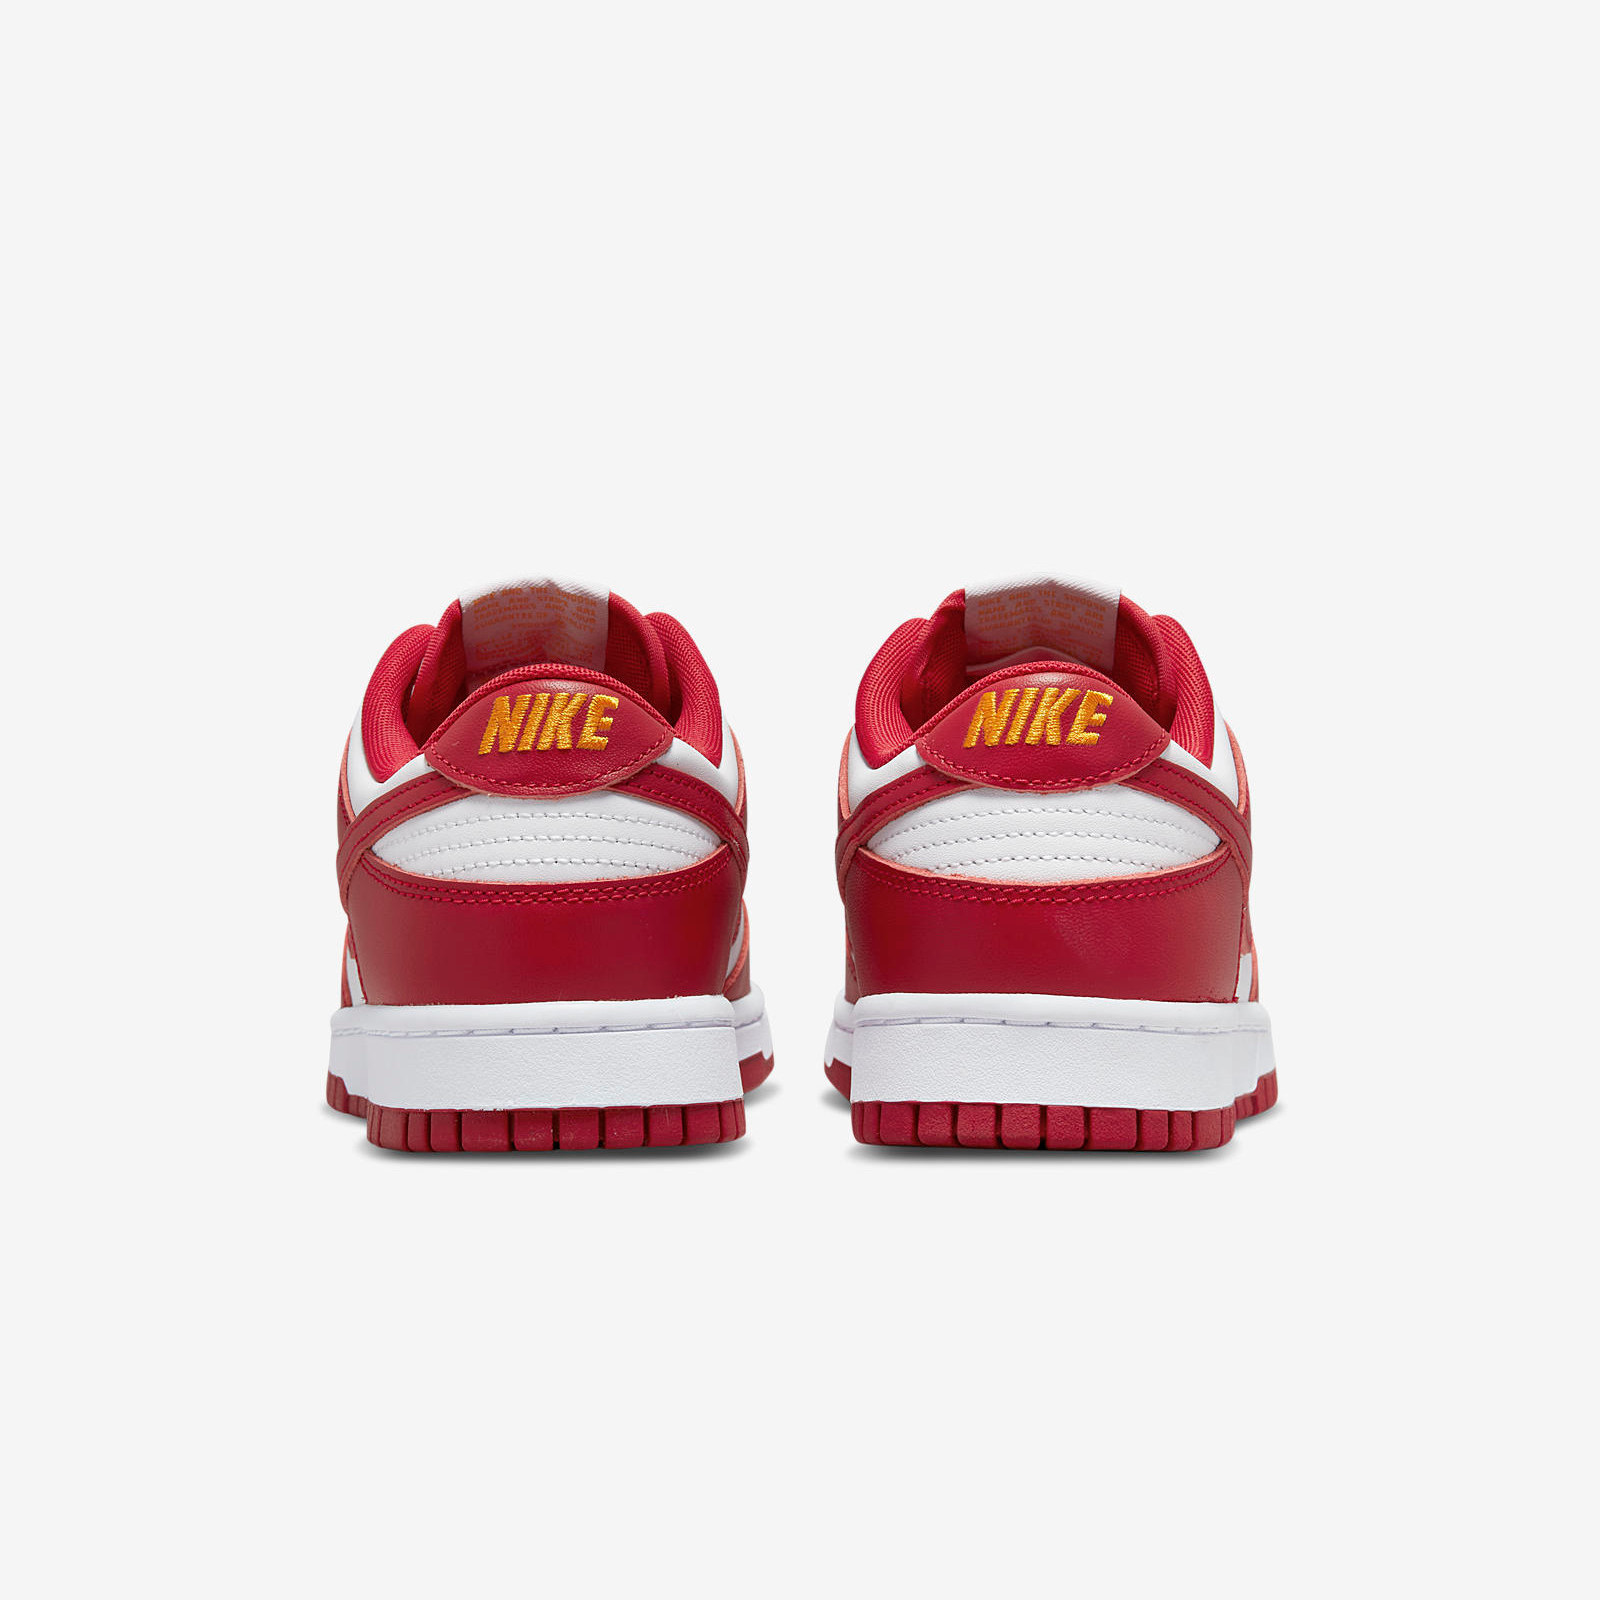 Nike Dunk Low
« Gym Red »